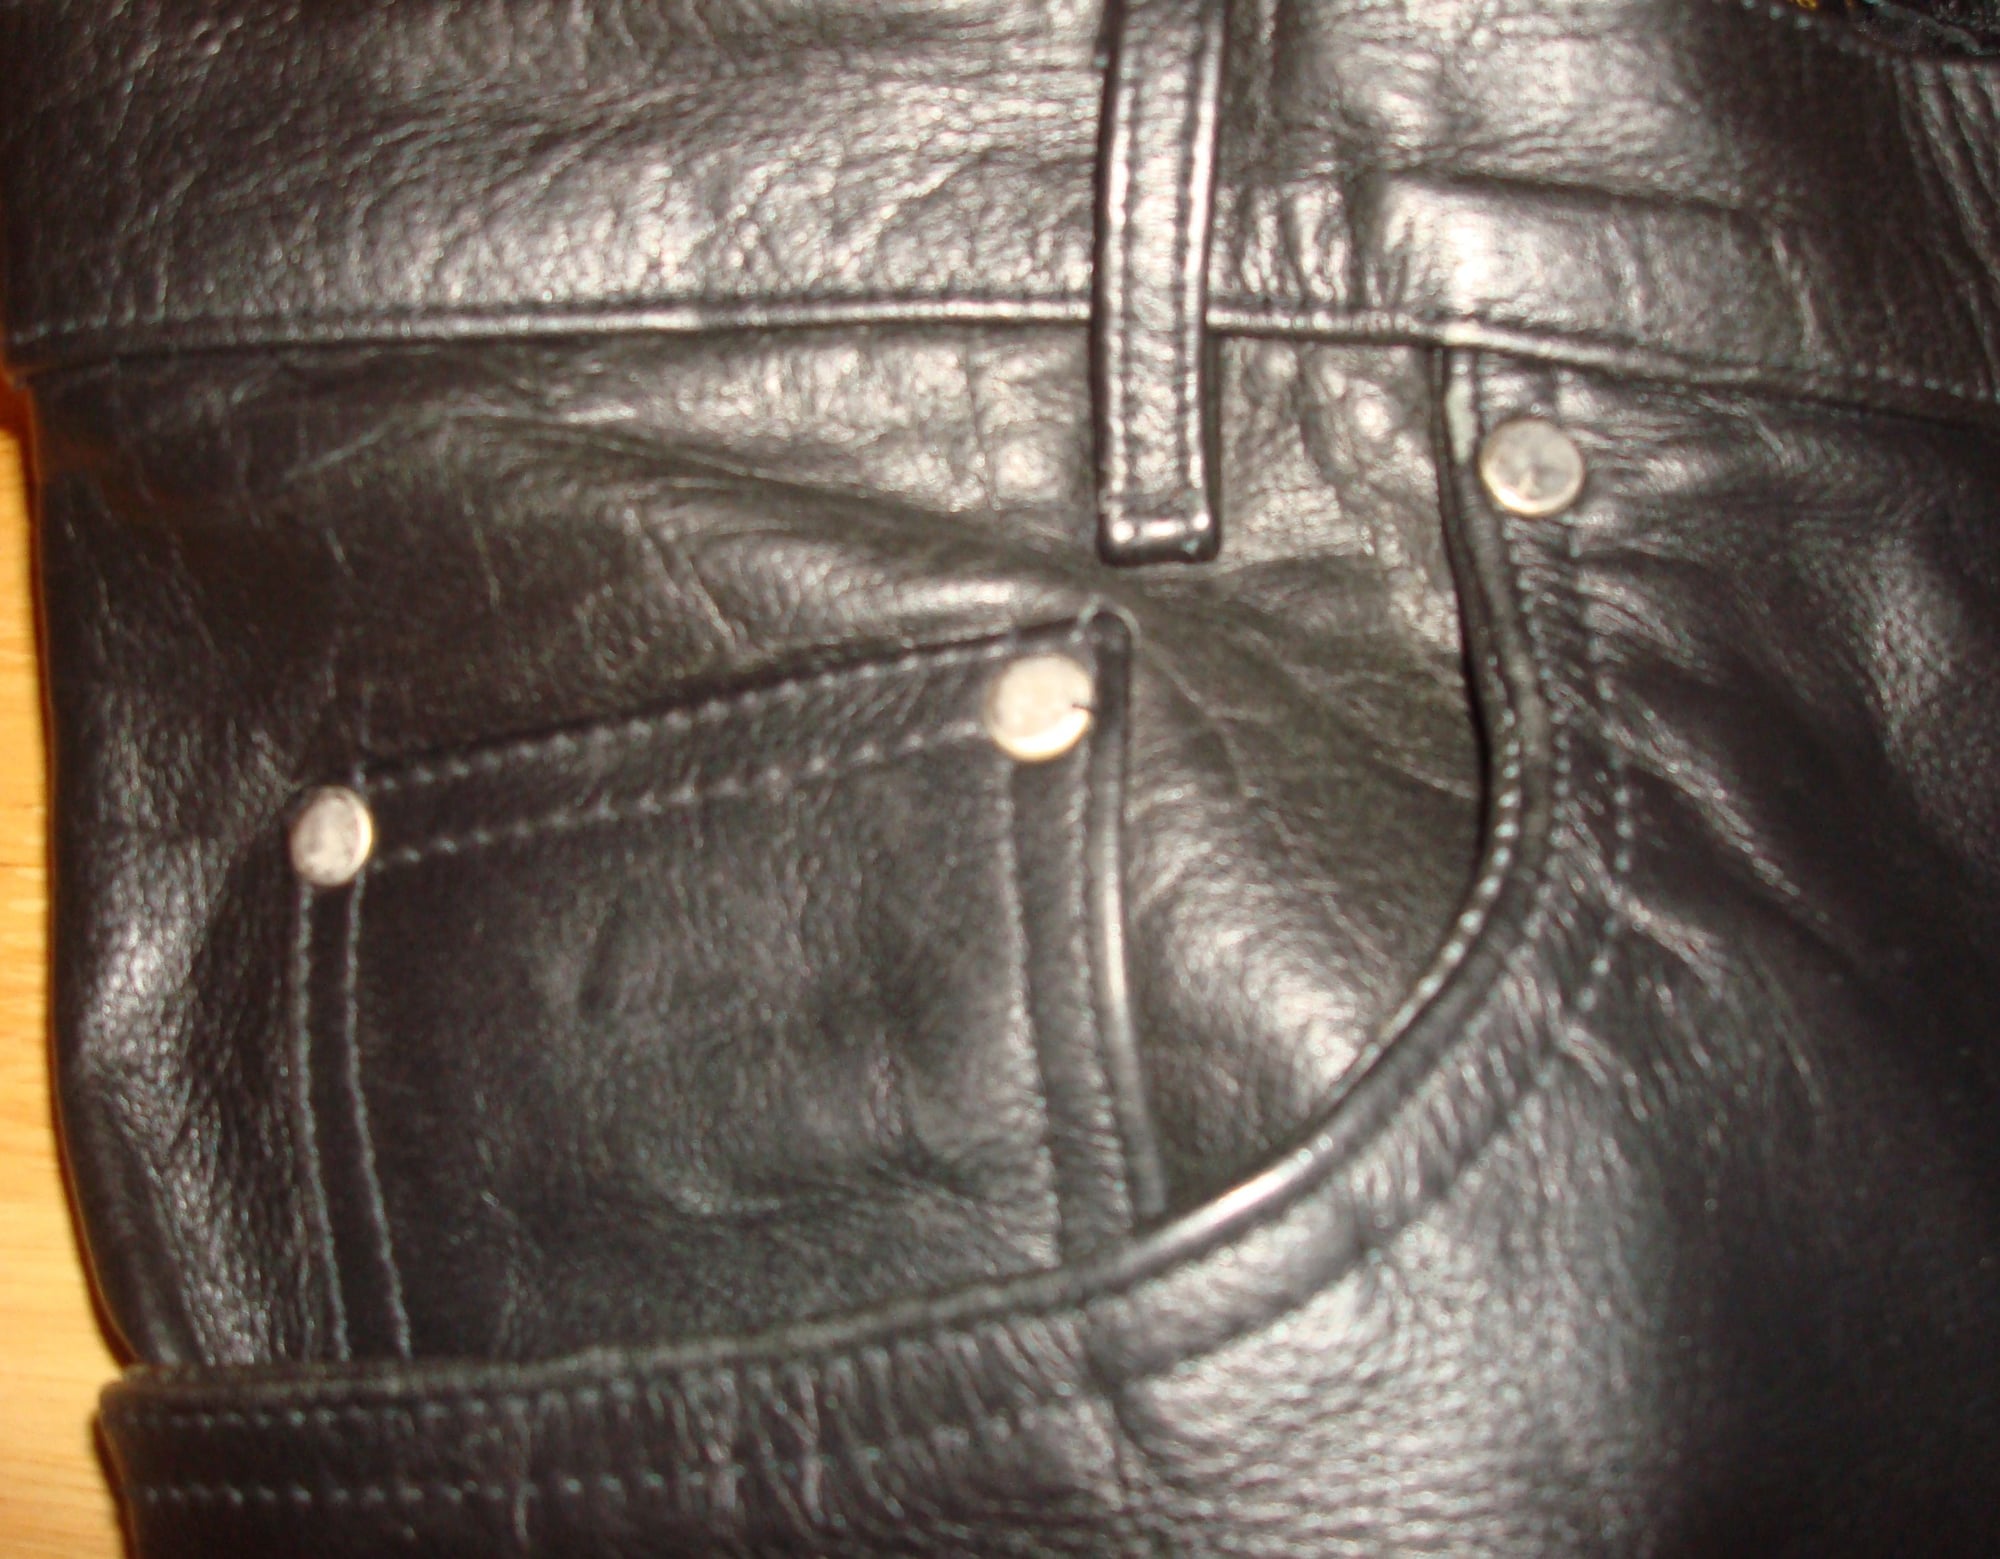 Heavy Duty Leather Pants--Like New Condition - Harley Davidson Forums